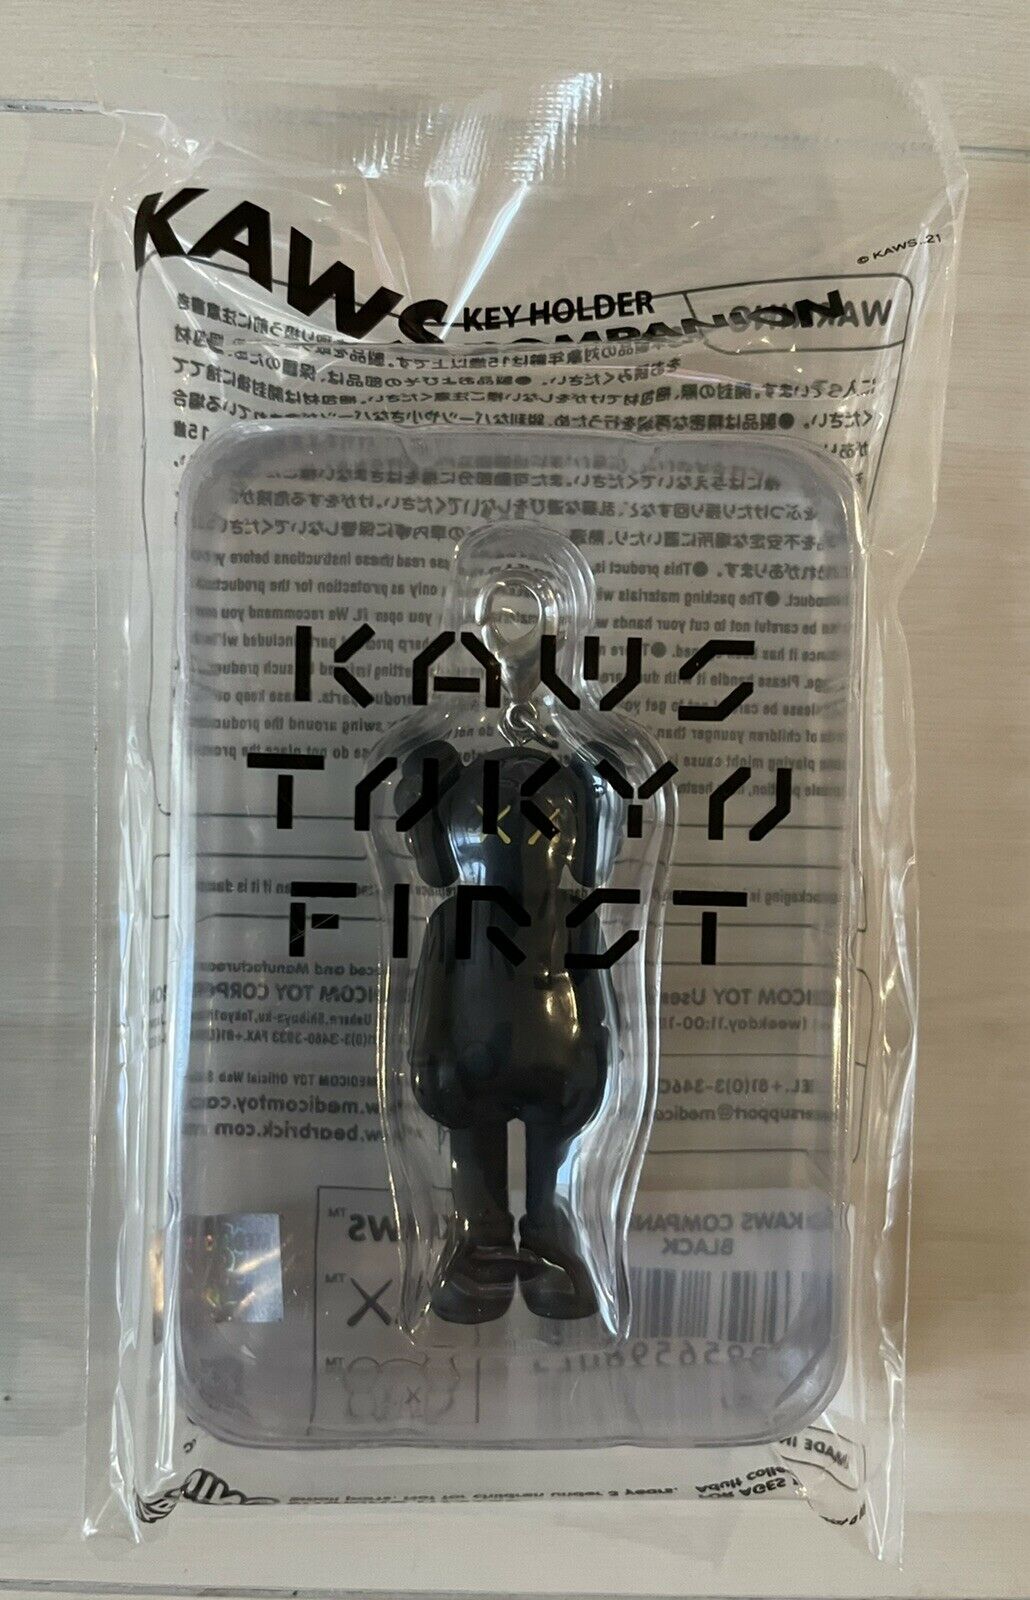 Tokyo First Keychain by Kaws | DogStreets